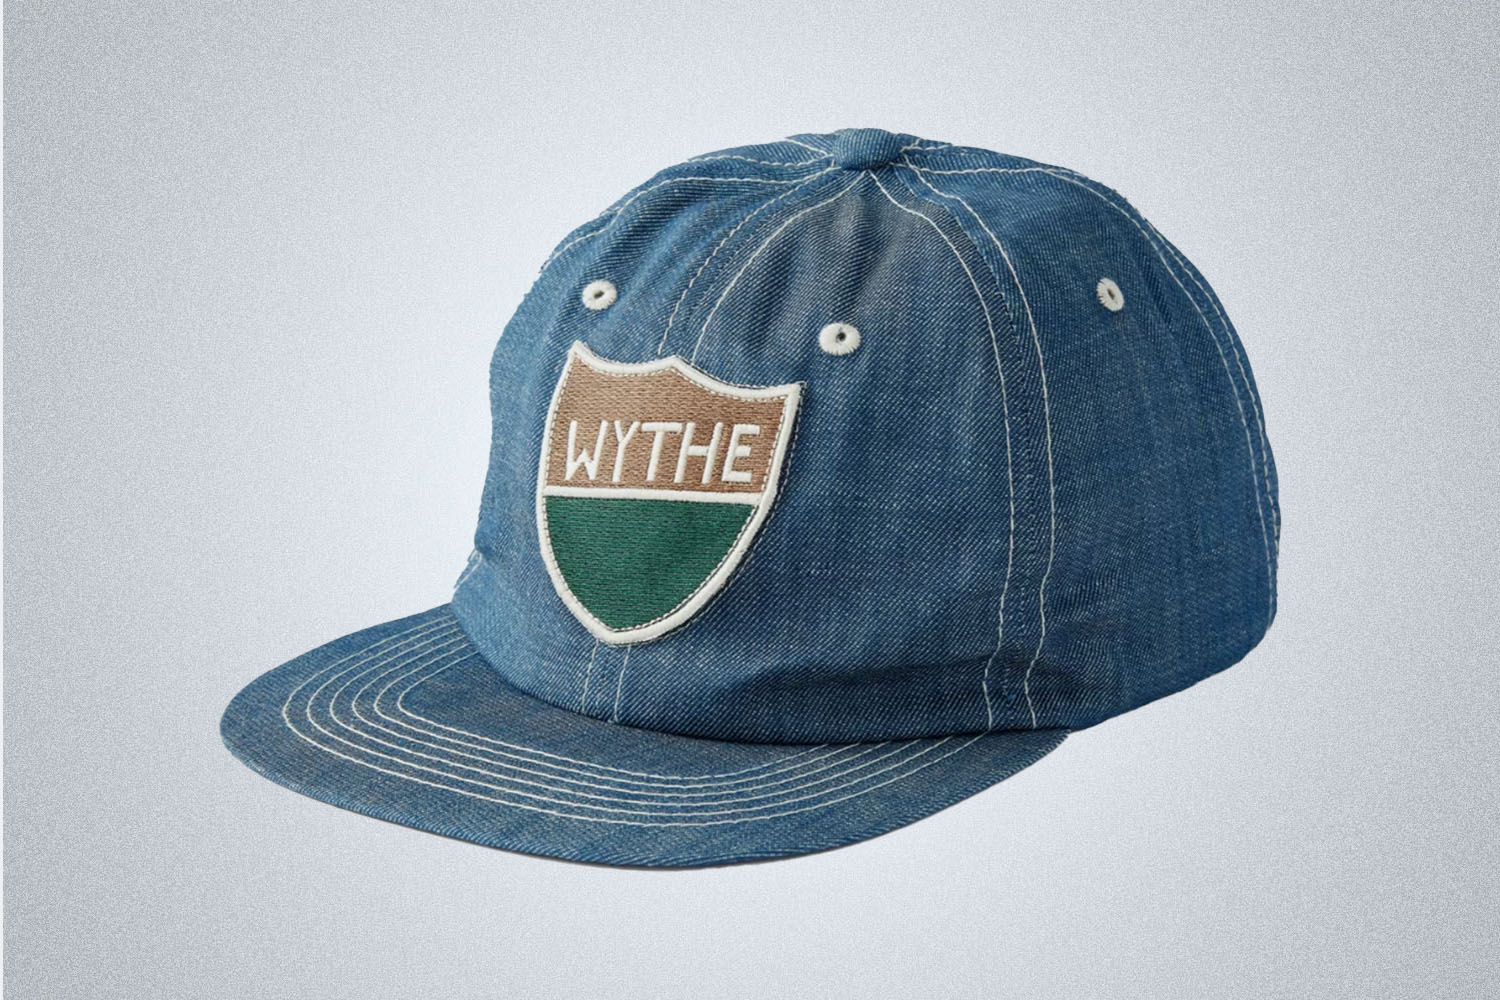 a blue denim-colored Whthe hat on a grey background